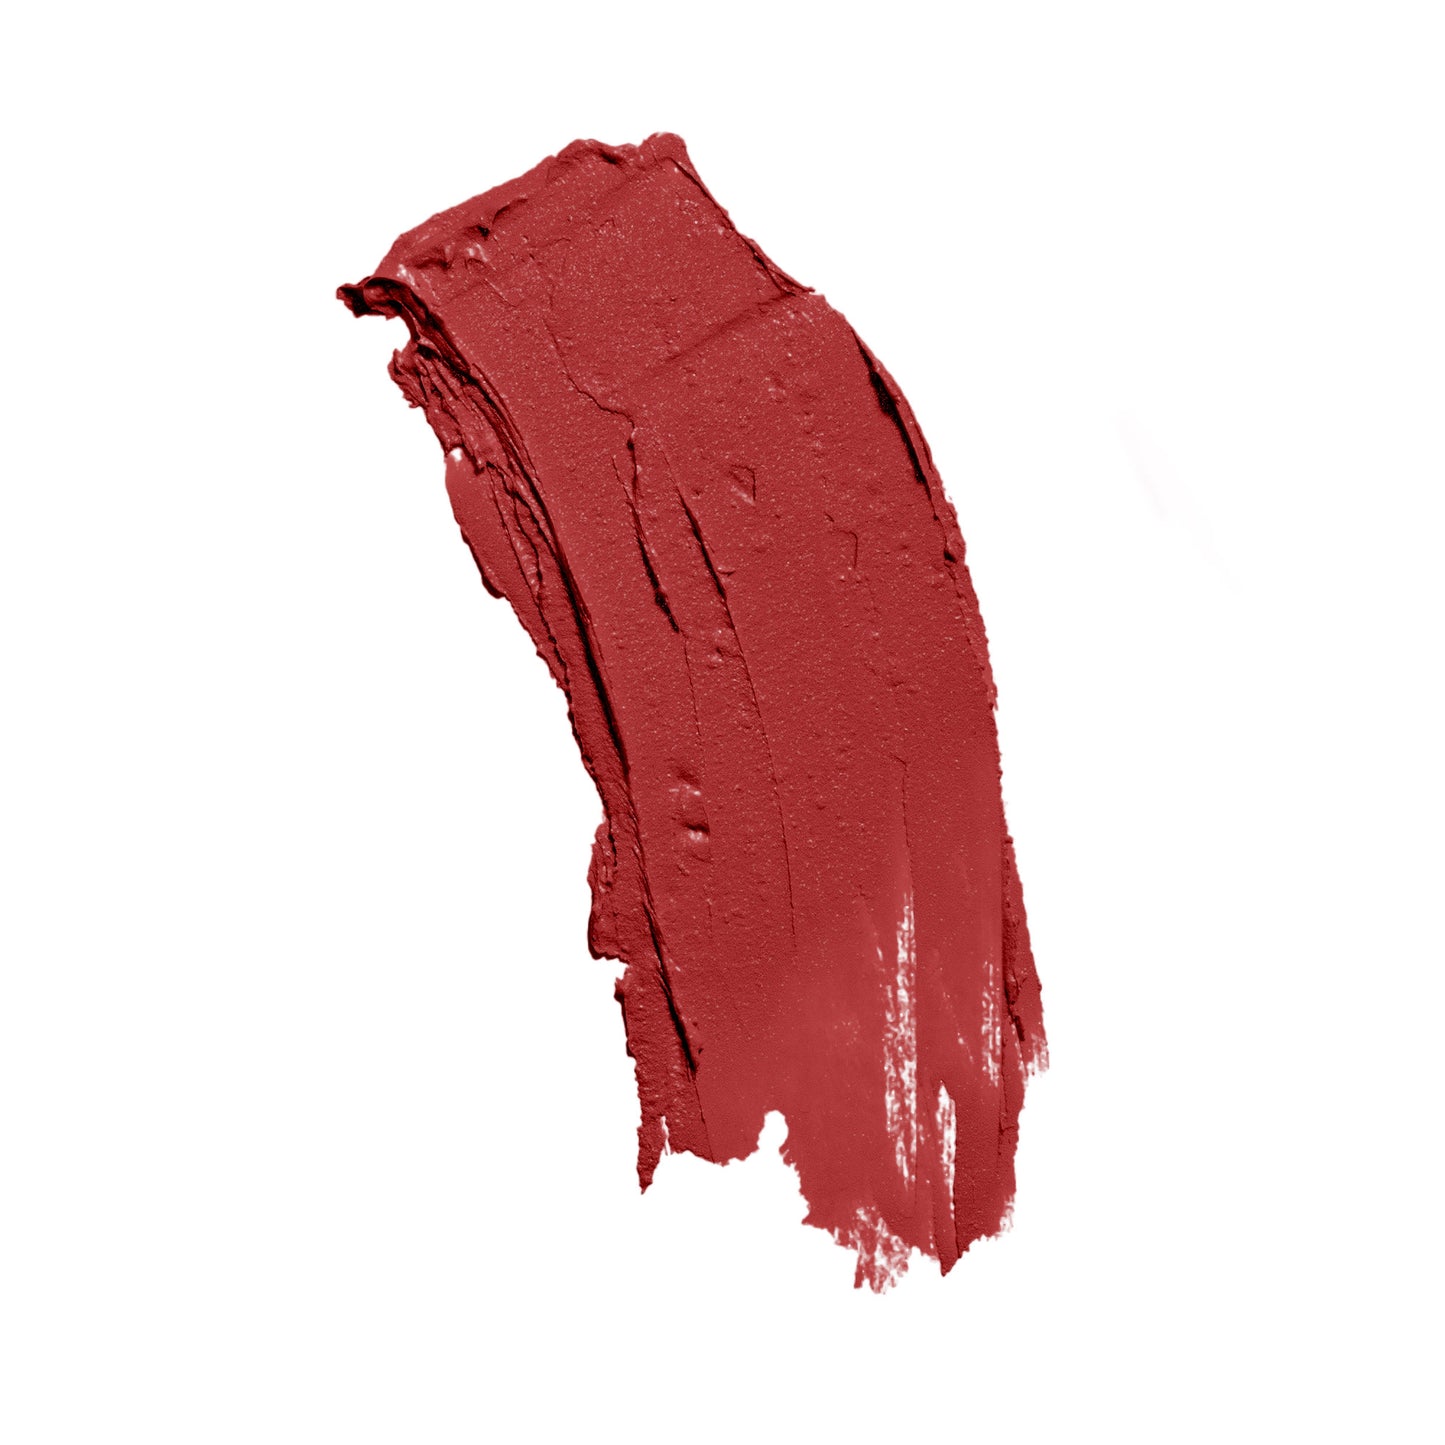 NXTE NXTEssence Girls Night Out Lip Stick Swatch Color